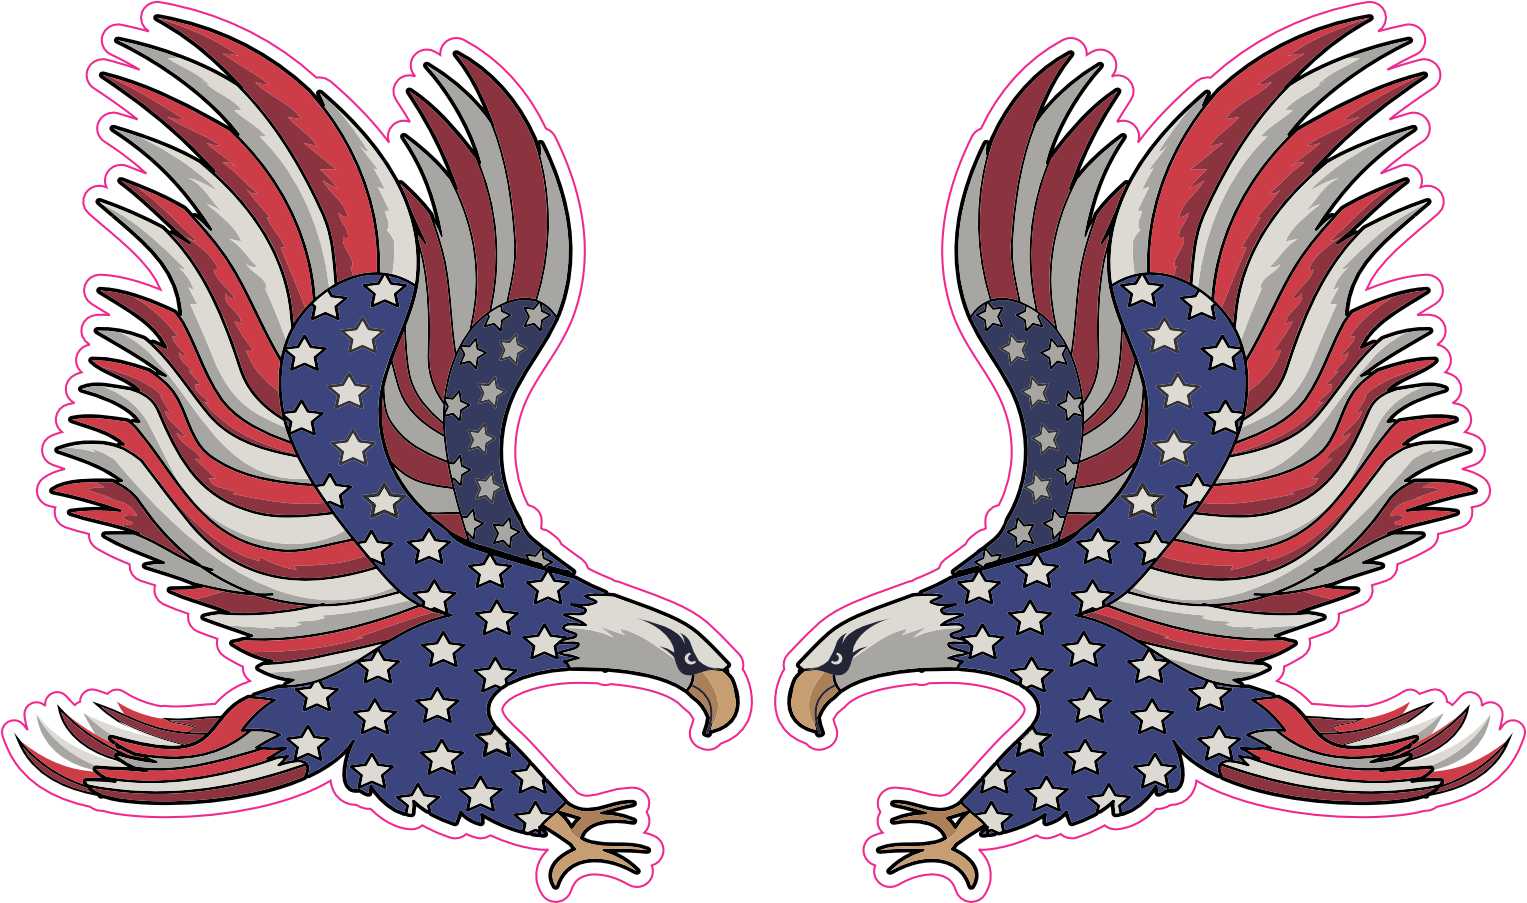 USA Eagle Stickers Car Truck Vehicle Bumper Decal